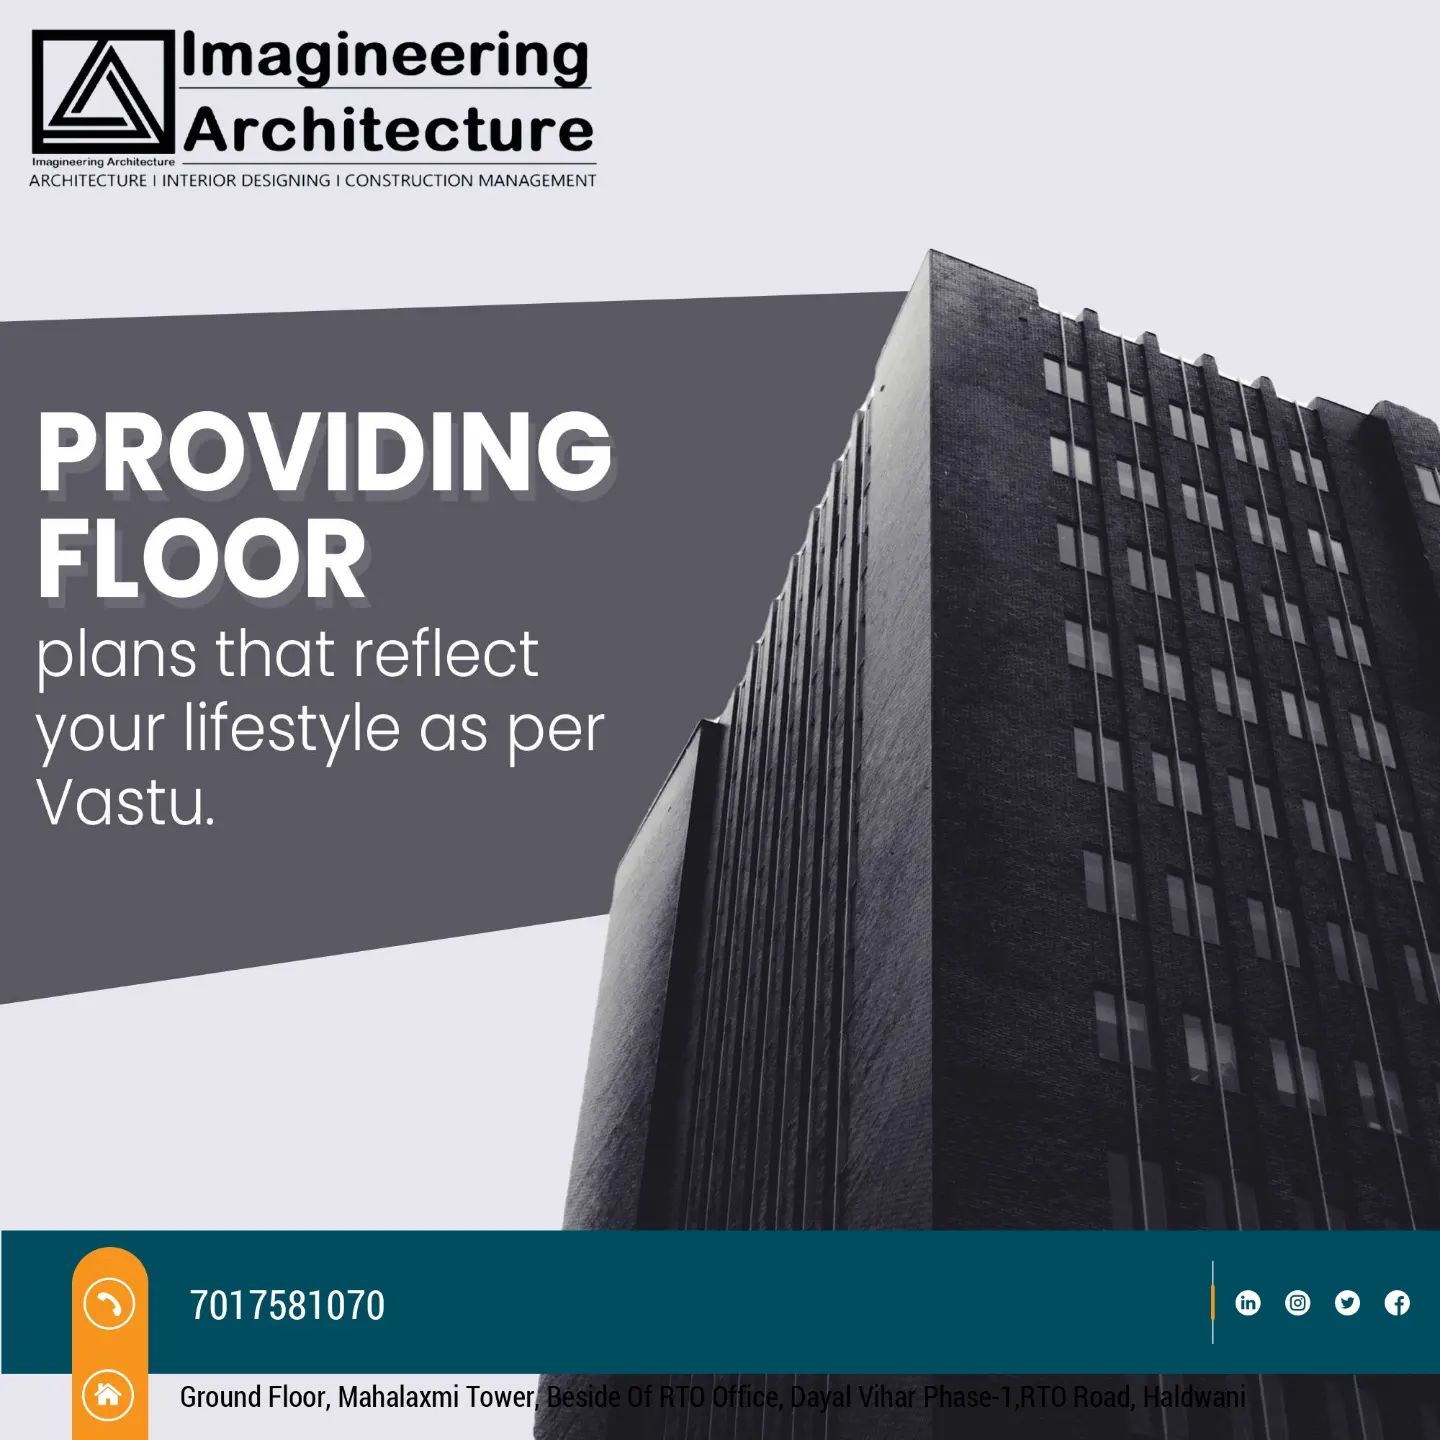 IMAGINEERING ARCHITECTURE|Legal Services|Professional Services